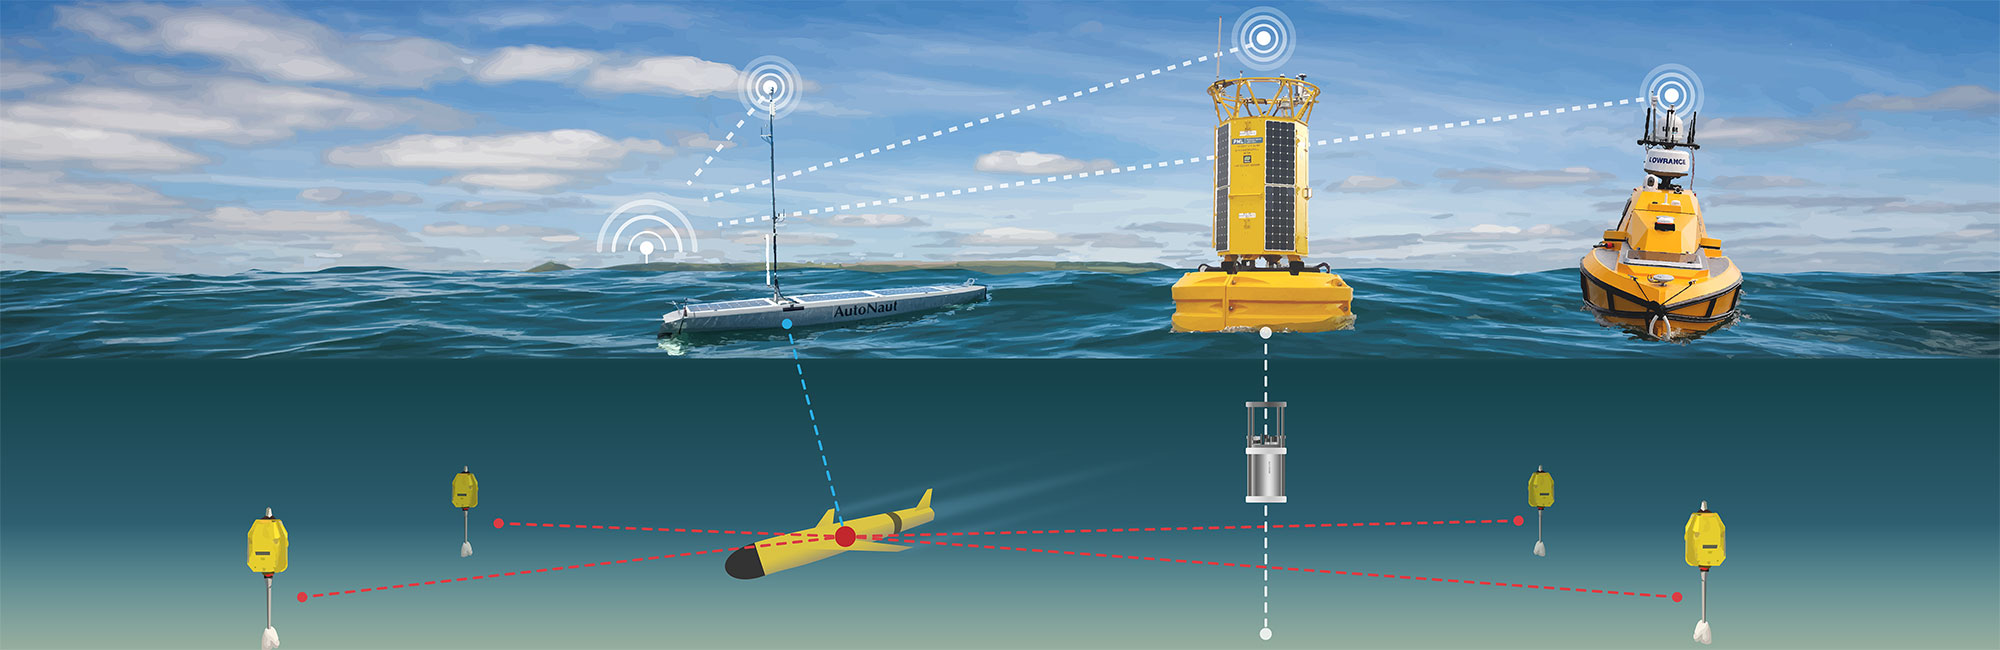 Illustration of various elements of the smart sound connectivity including unmanned vessel, yellow data buoy and underwater sensors